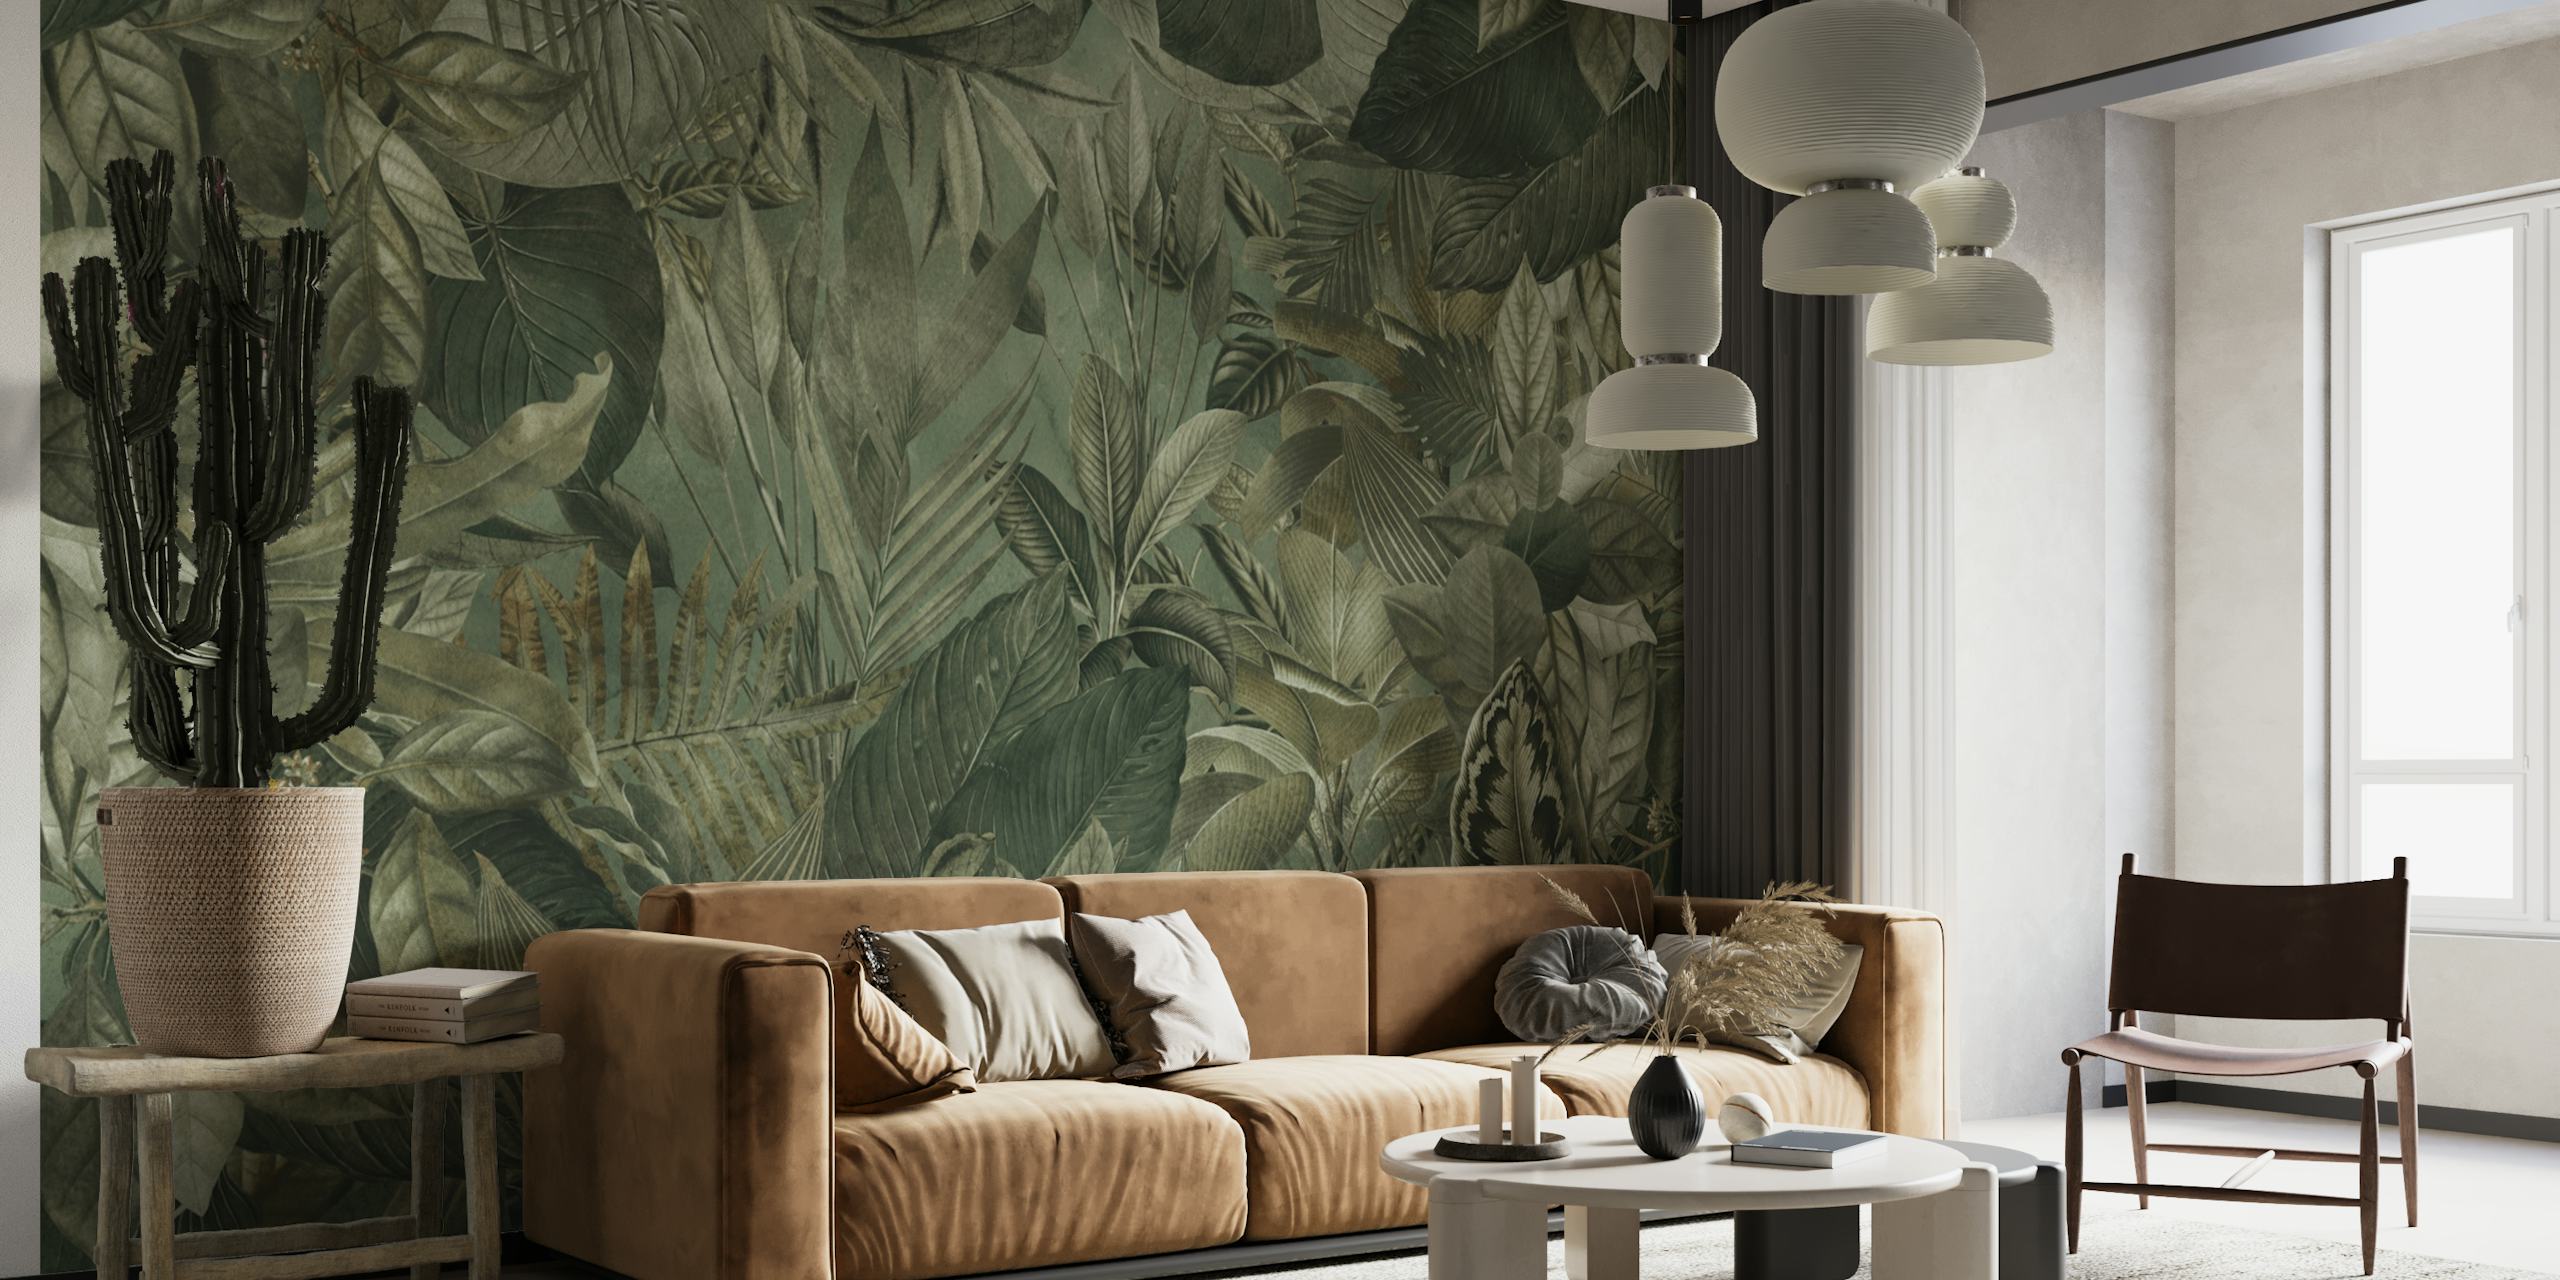 Tropical jungle-themed mural showcasing olive green foliage and botanical elements.